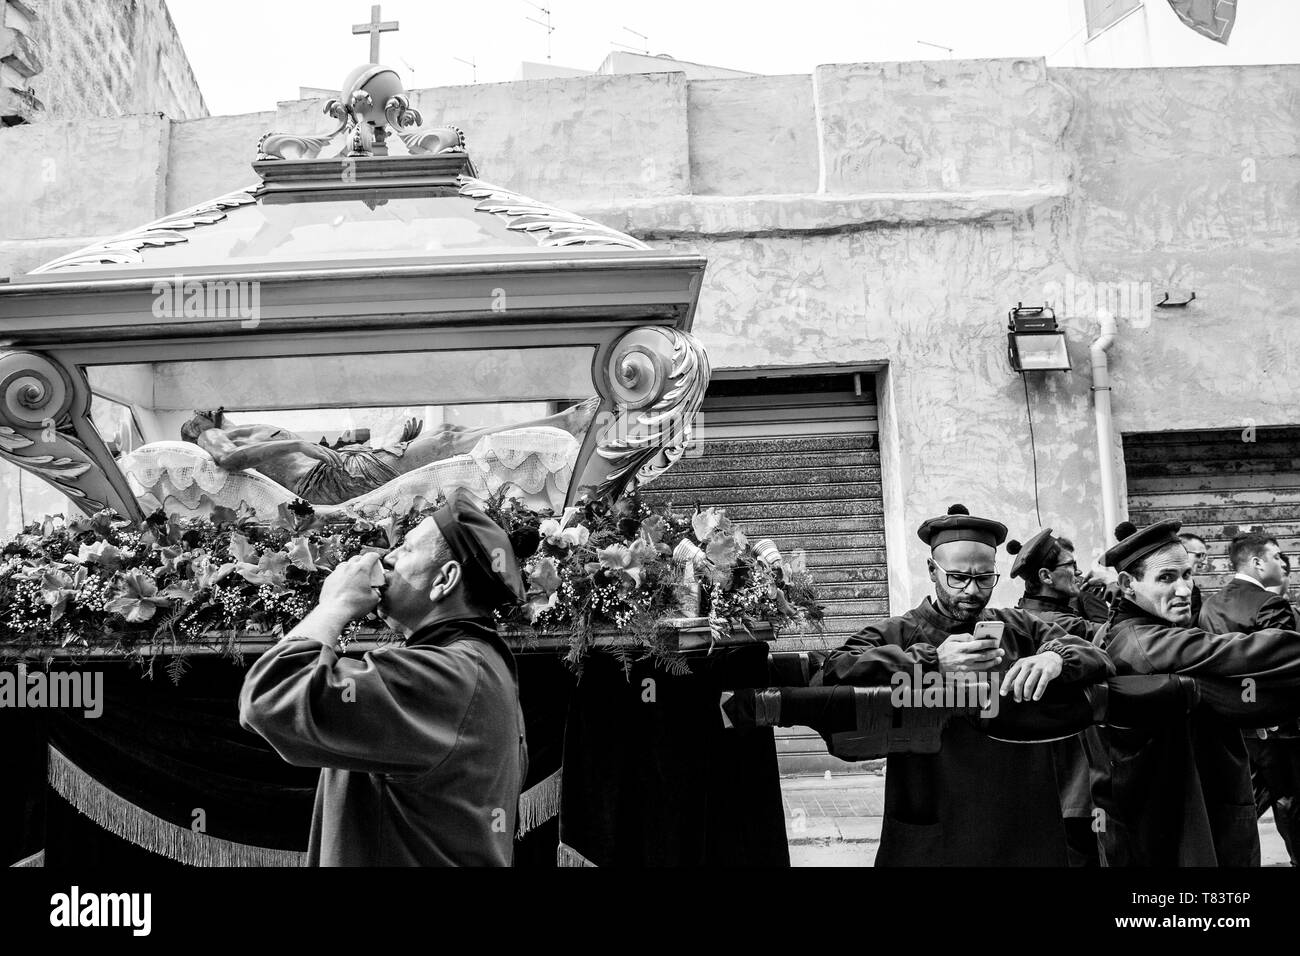 TRAPANI, ITALY - Aprile 19-20, 2019 - The Mysteries of Trapani is a 24 hours long procession featuring twenty floats of lifelike scenes of the Passion Stock Photo